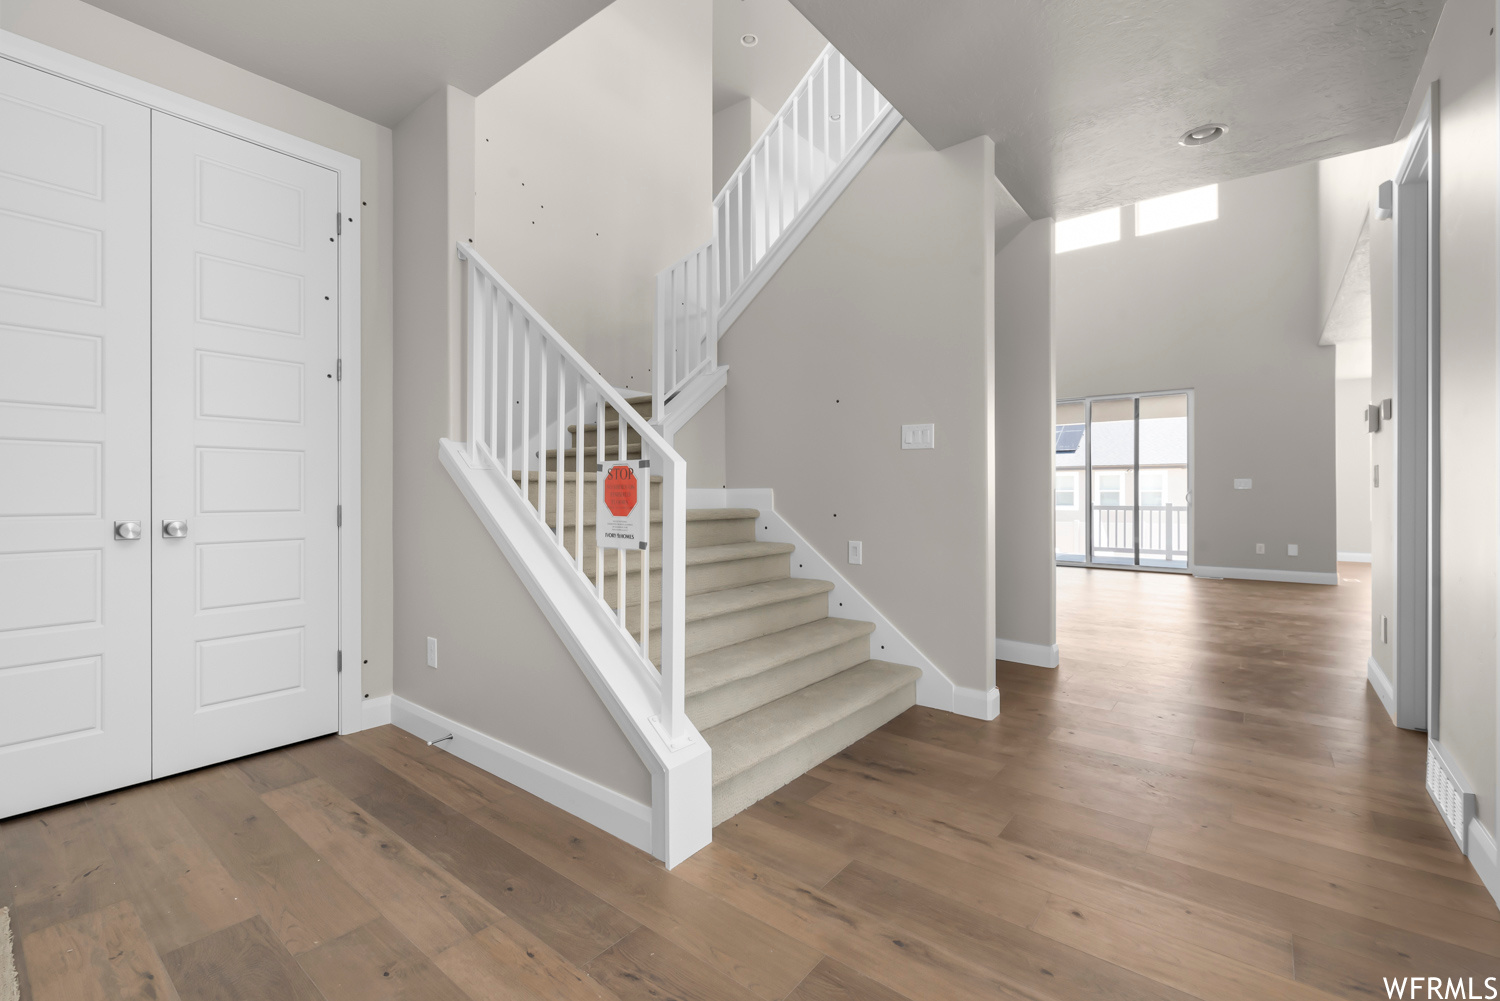 Staircase with a high ceiling and hardwood / wood-style floors